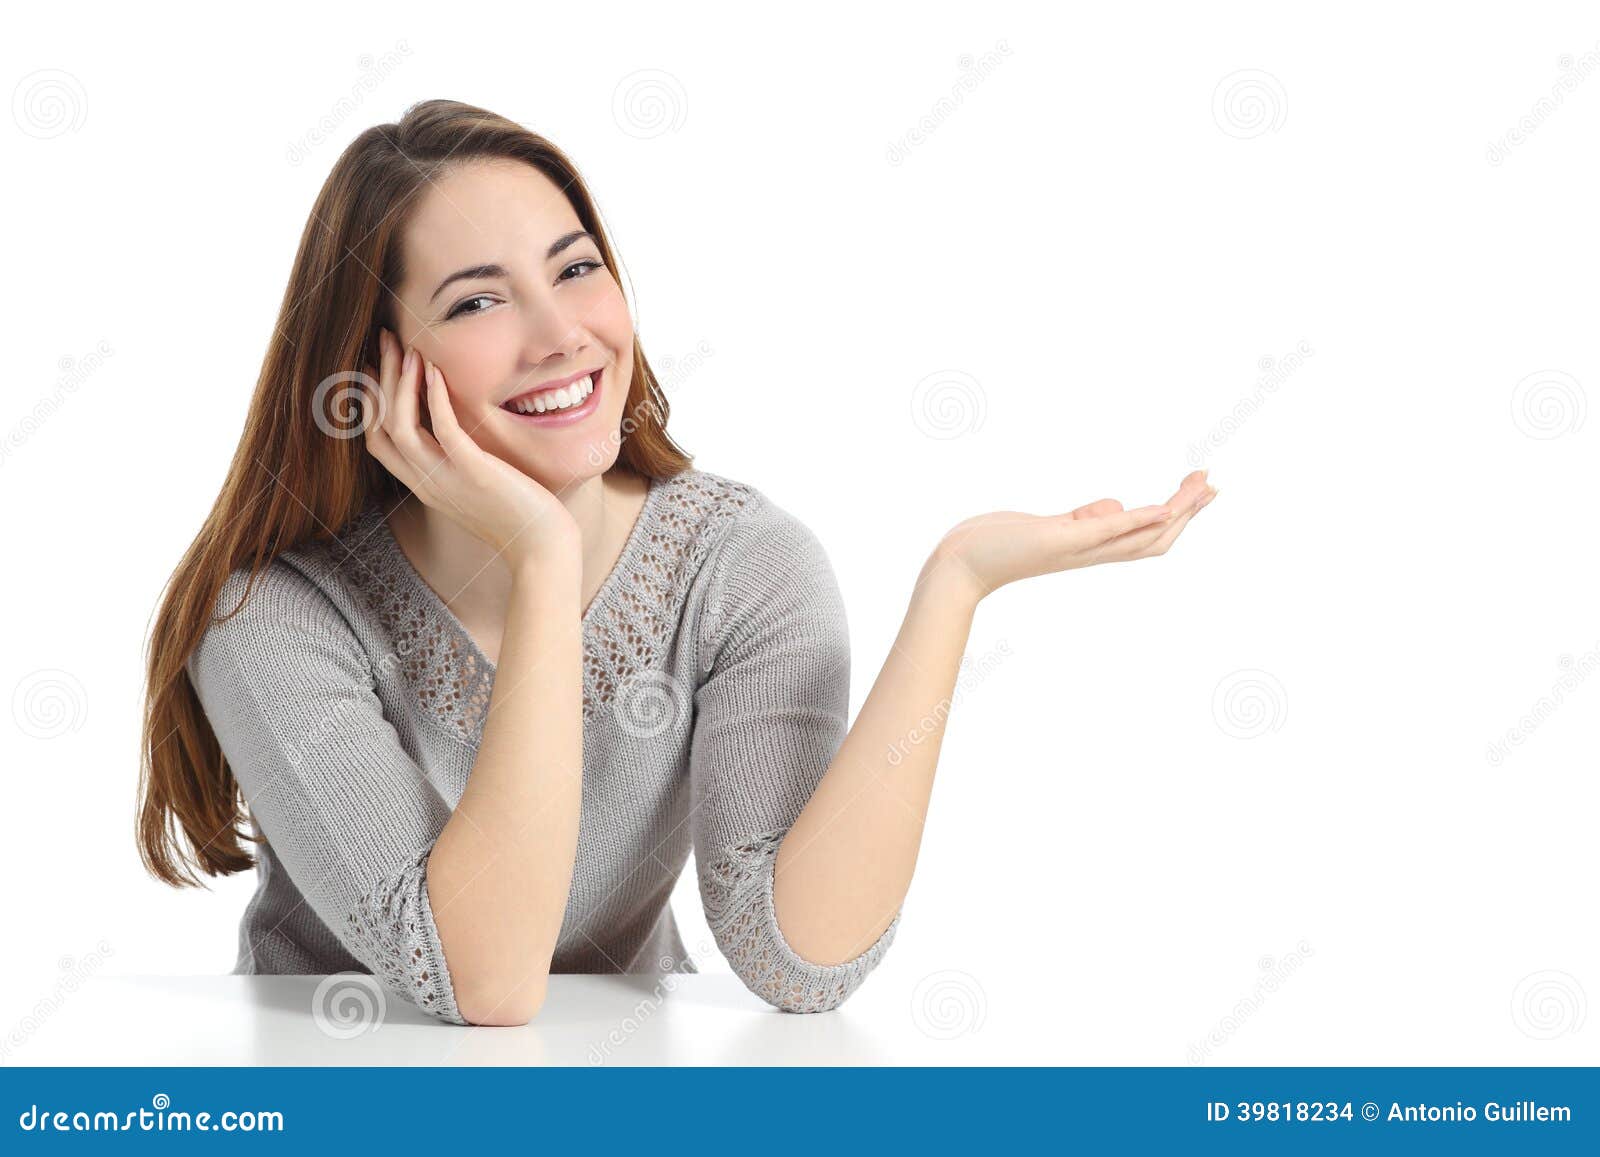 happy woman presenting with open hand holding something blank